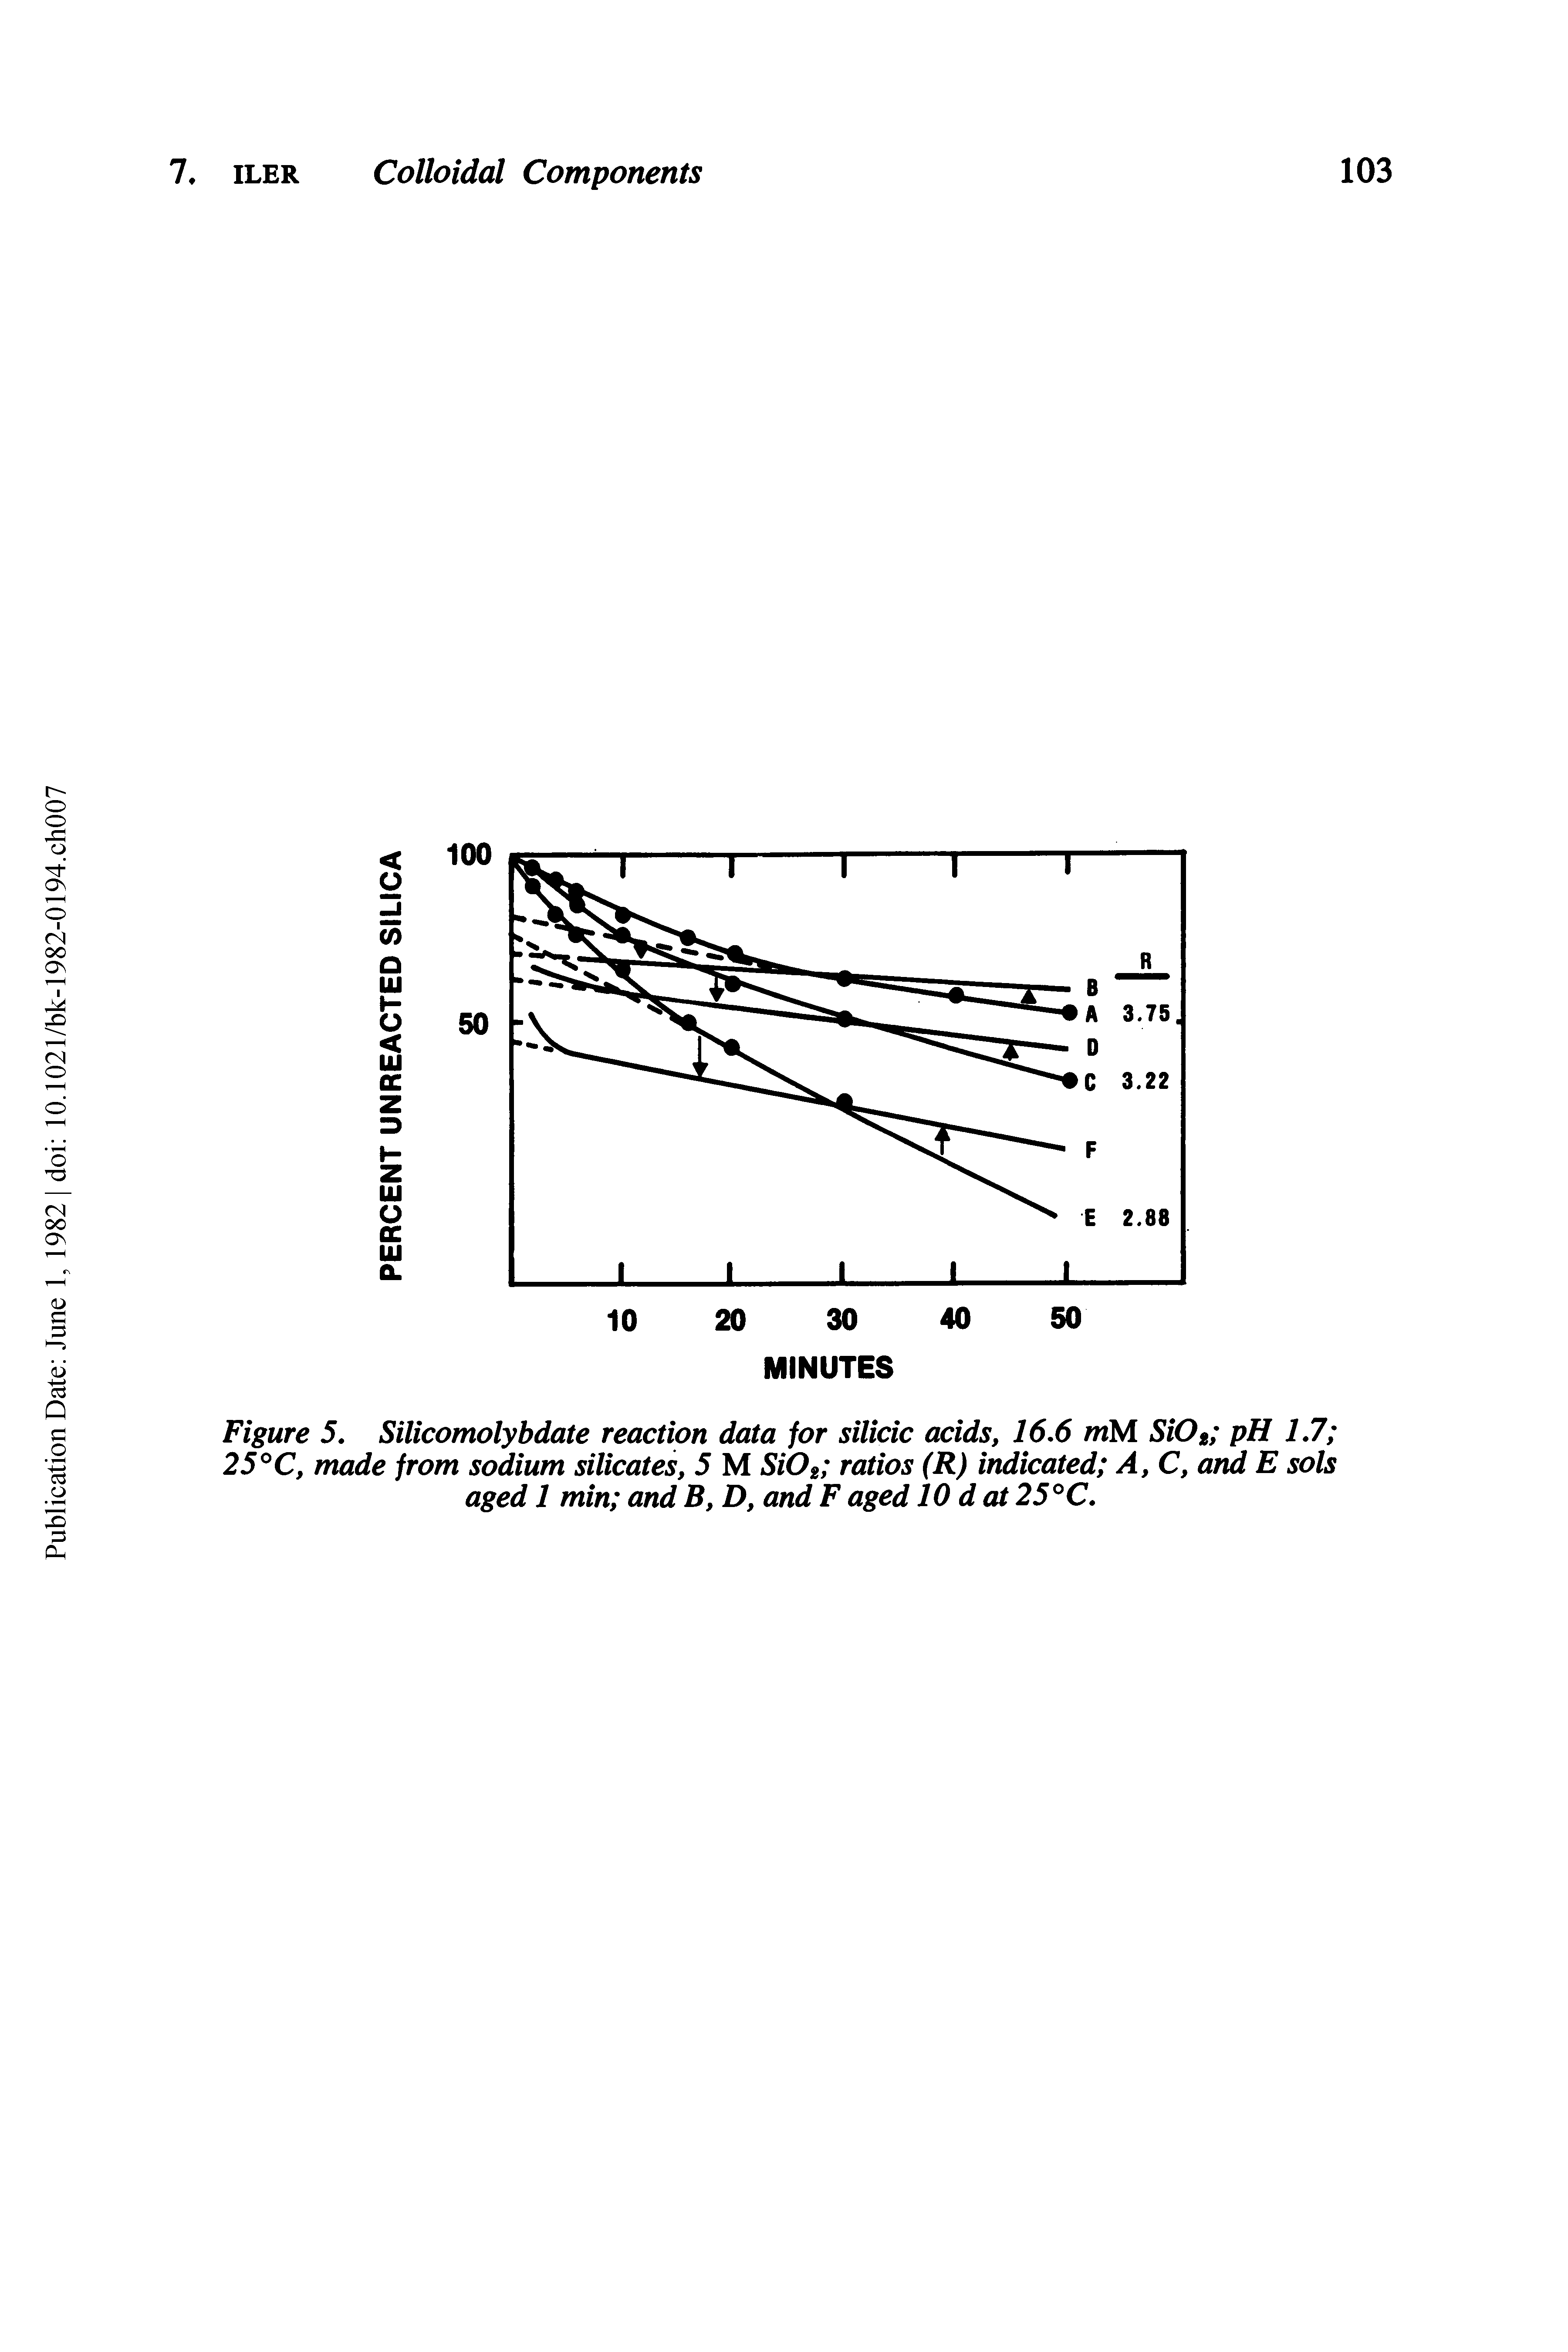 Figure 5. Silicomolybdate reaction data for silicic acids, 16.6 mM SiOt pH 1.7 25°C, made from sodium silicates, 5 M ratios (R) indicated A, C, arid E sols aged 1 min andB, D, andFaged 10 dot 25°C.